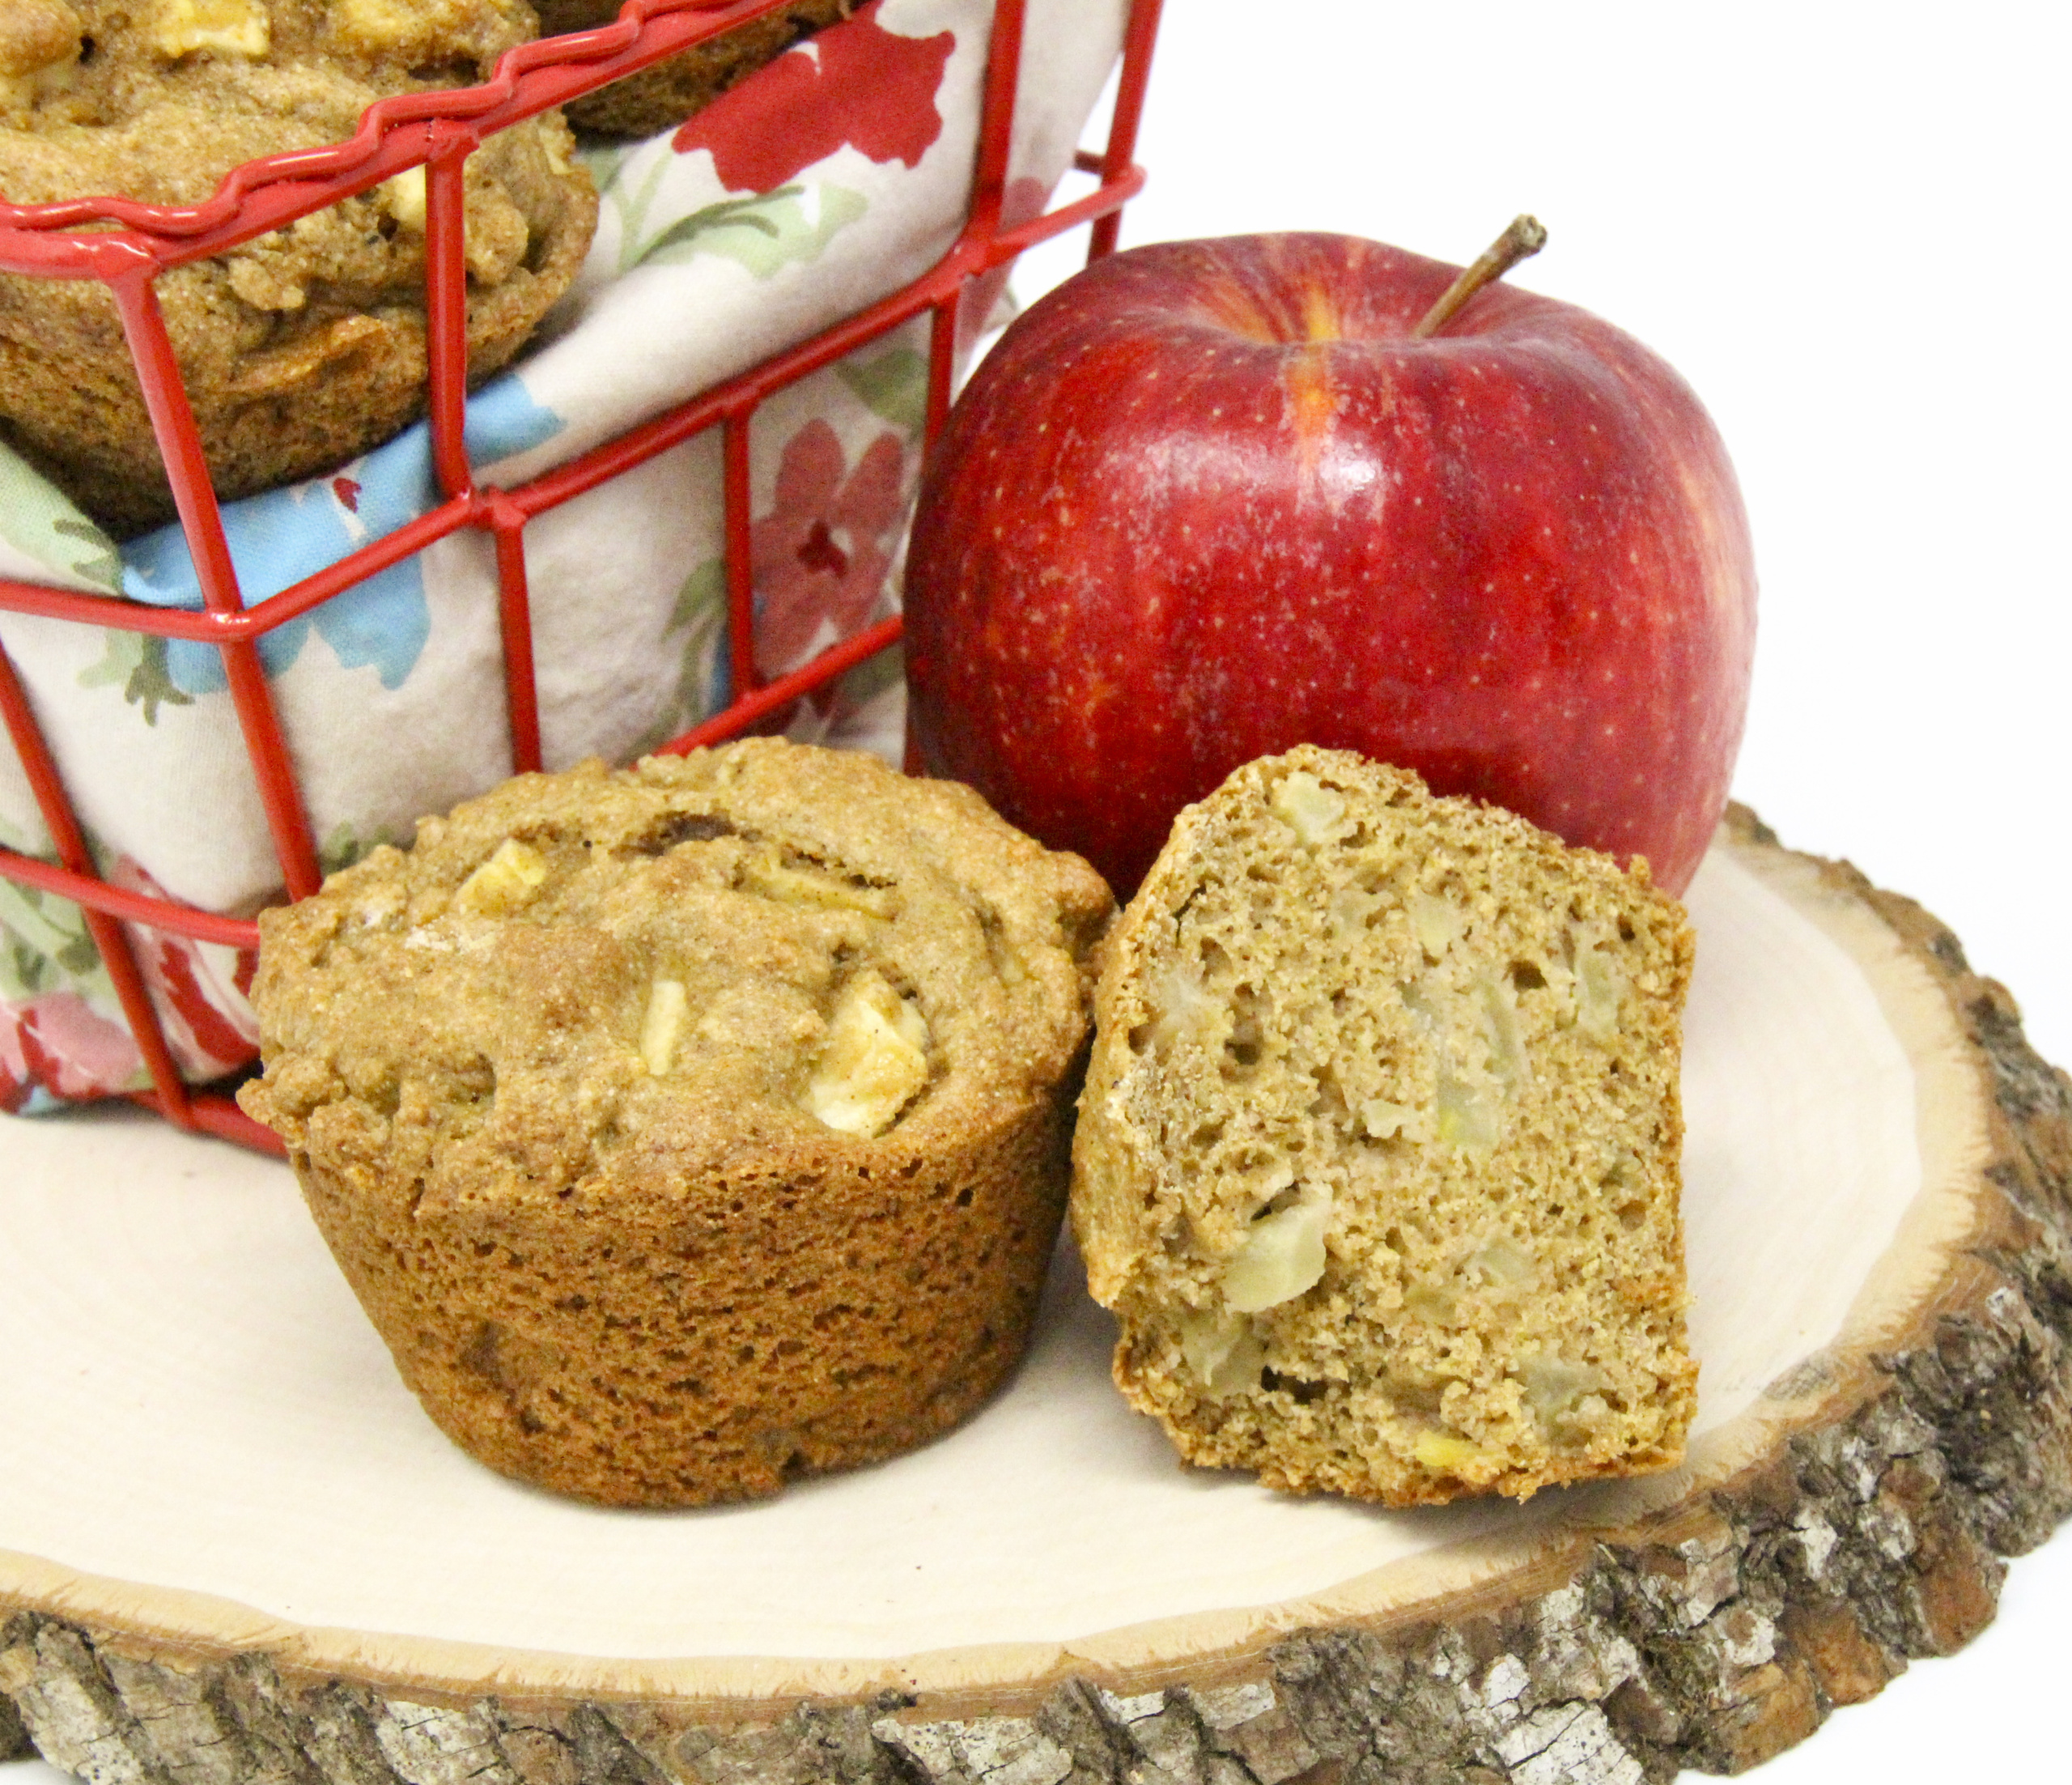 Cinnamon and nutmeg provides warming flavors while apples add a nice moistness to complement the 100% whole wheat flour Apple Spice Muffins. Recipe shared with permission granted by Maddie Day, author of MURDER AT THE LOBSTAH SHACK.